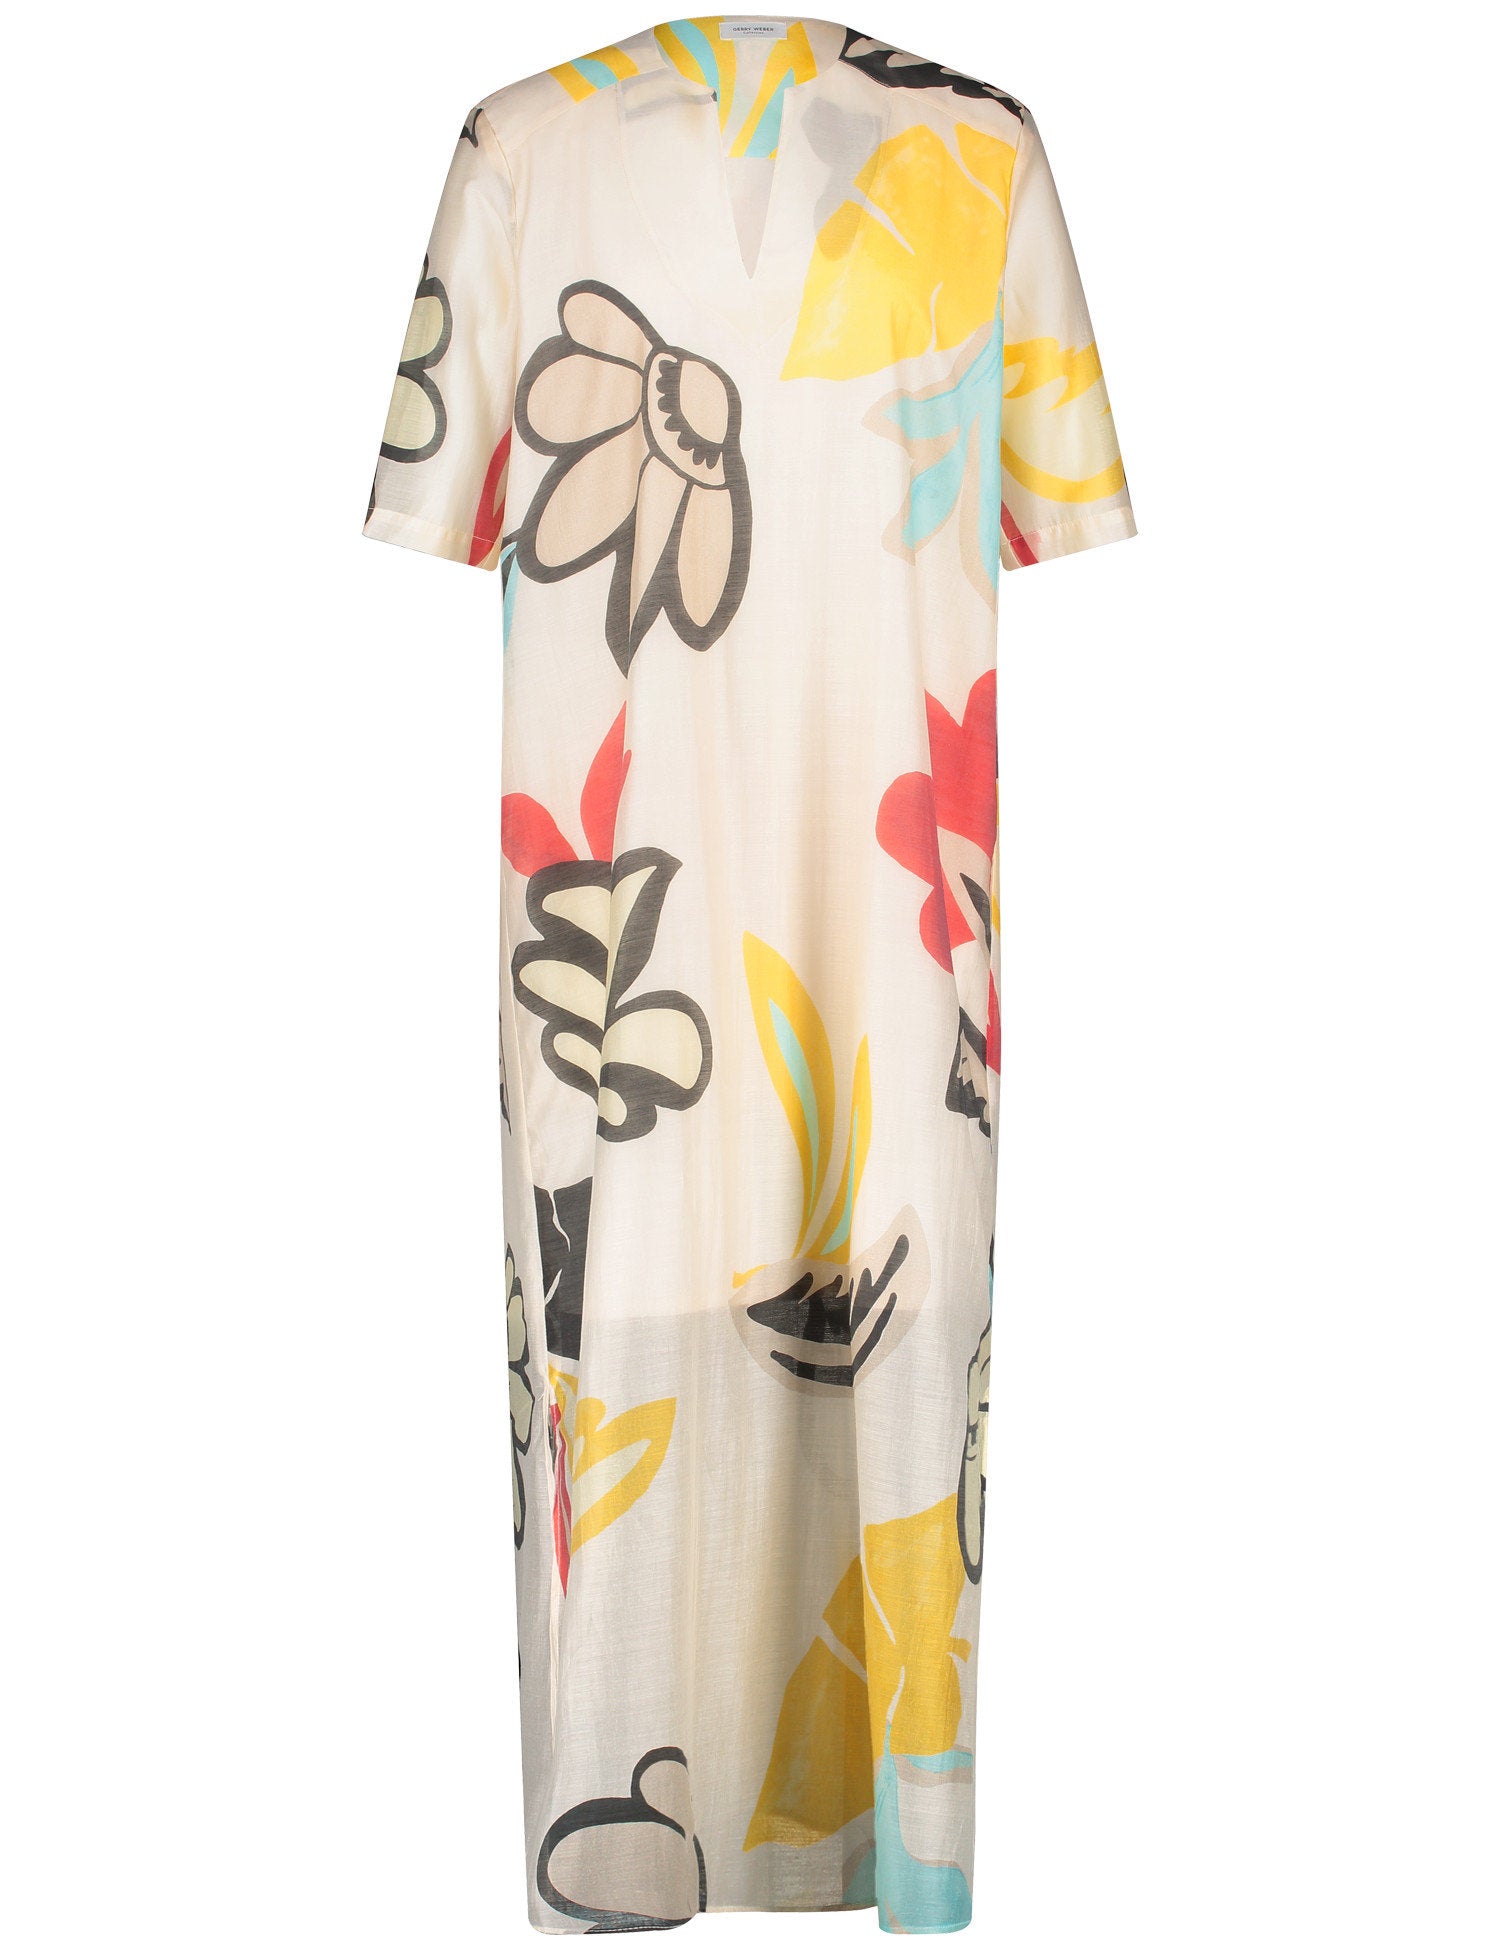 Flowing Midi Dress With A Floral Print_380074-31533_9048_07